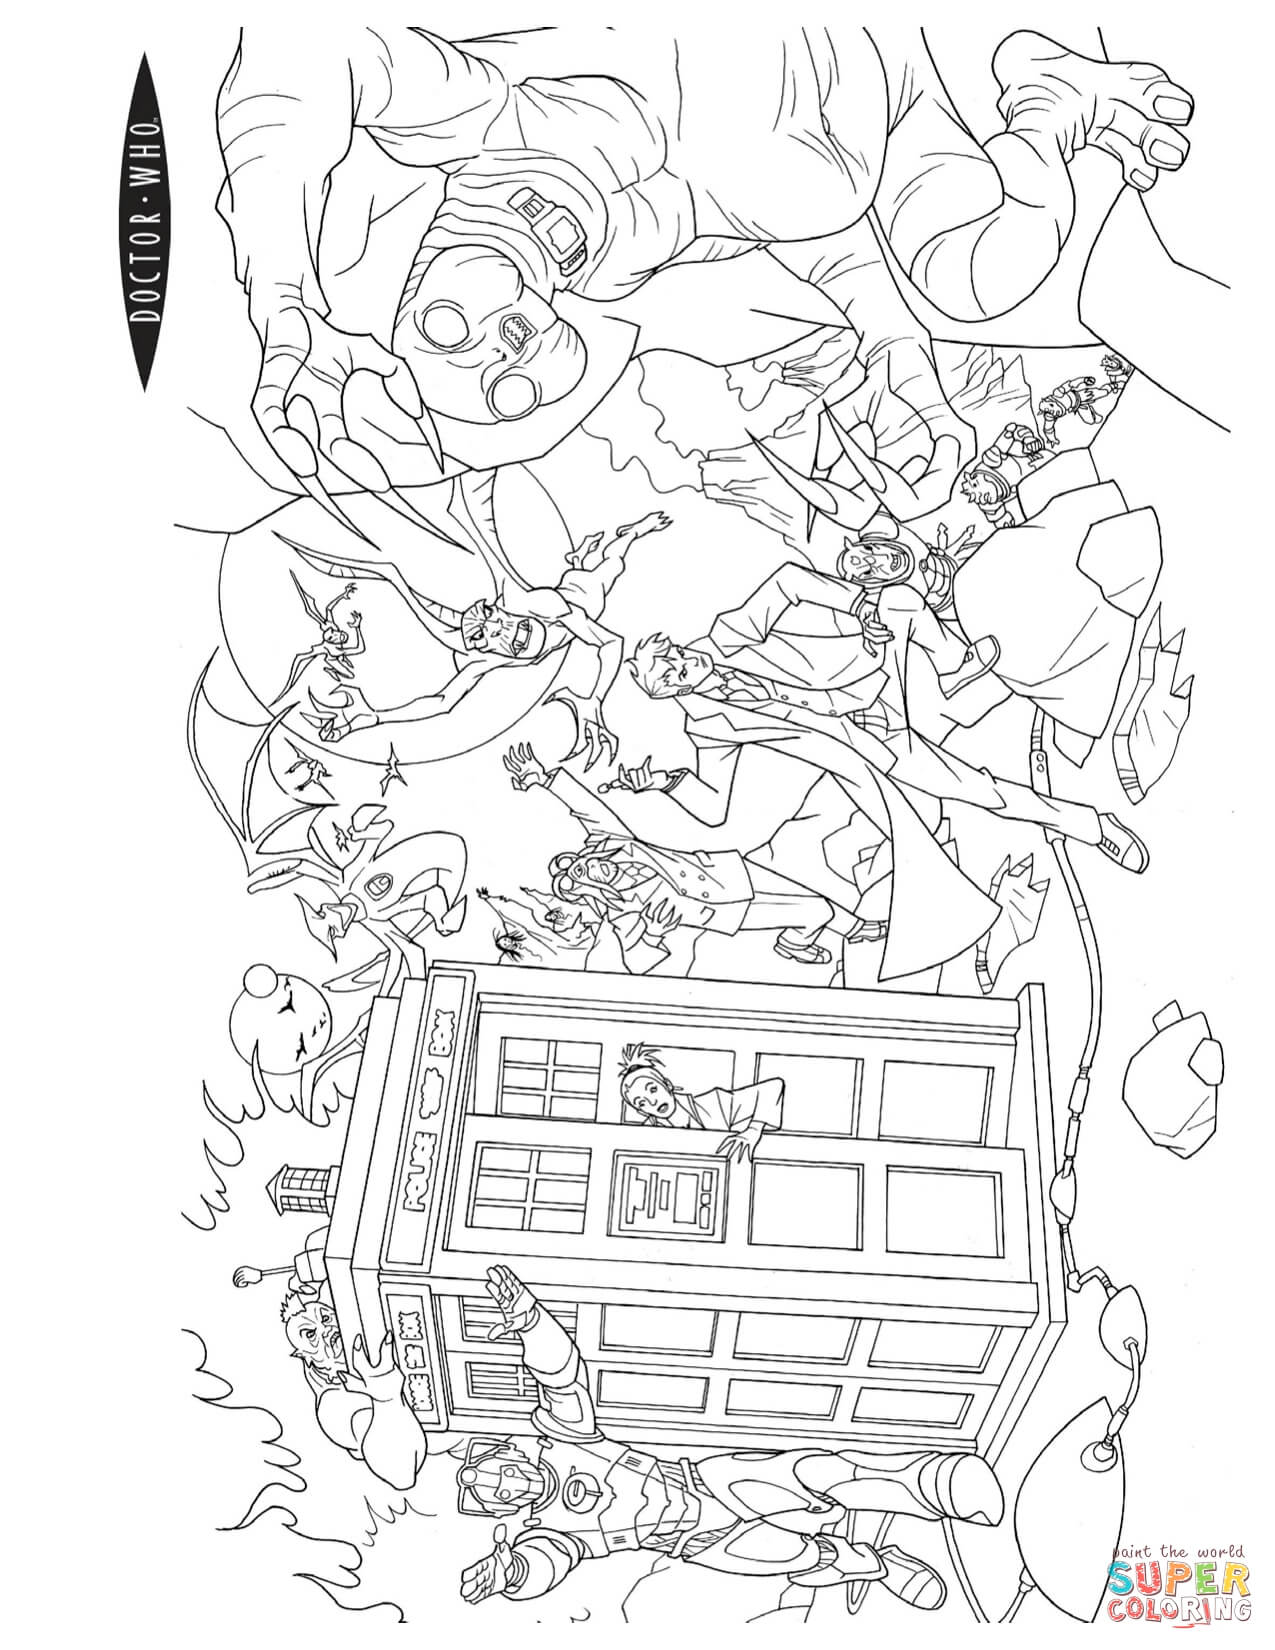 Doctor Who coloring pages | Free Coloring Pages